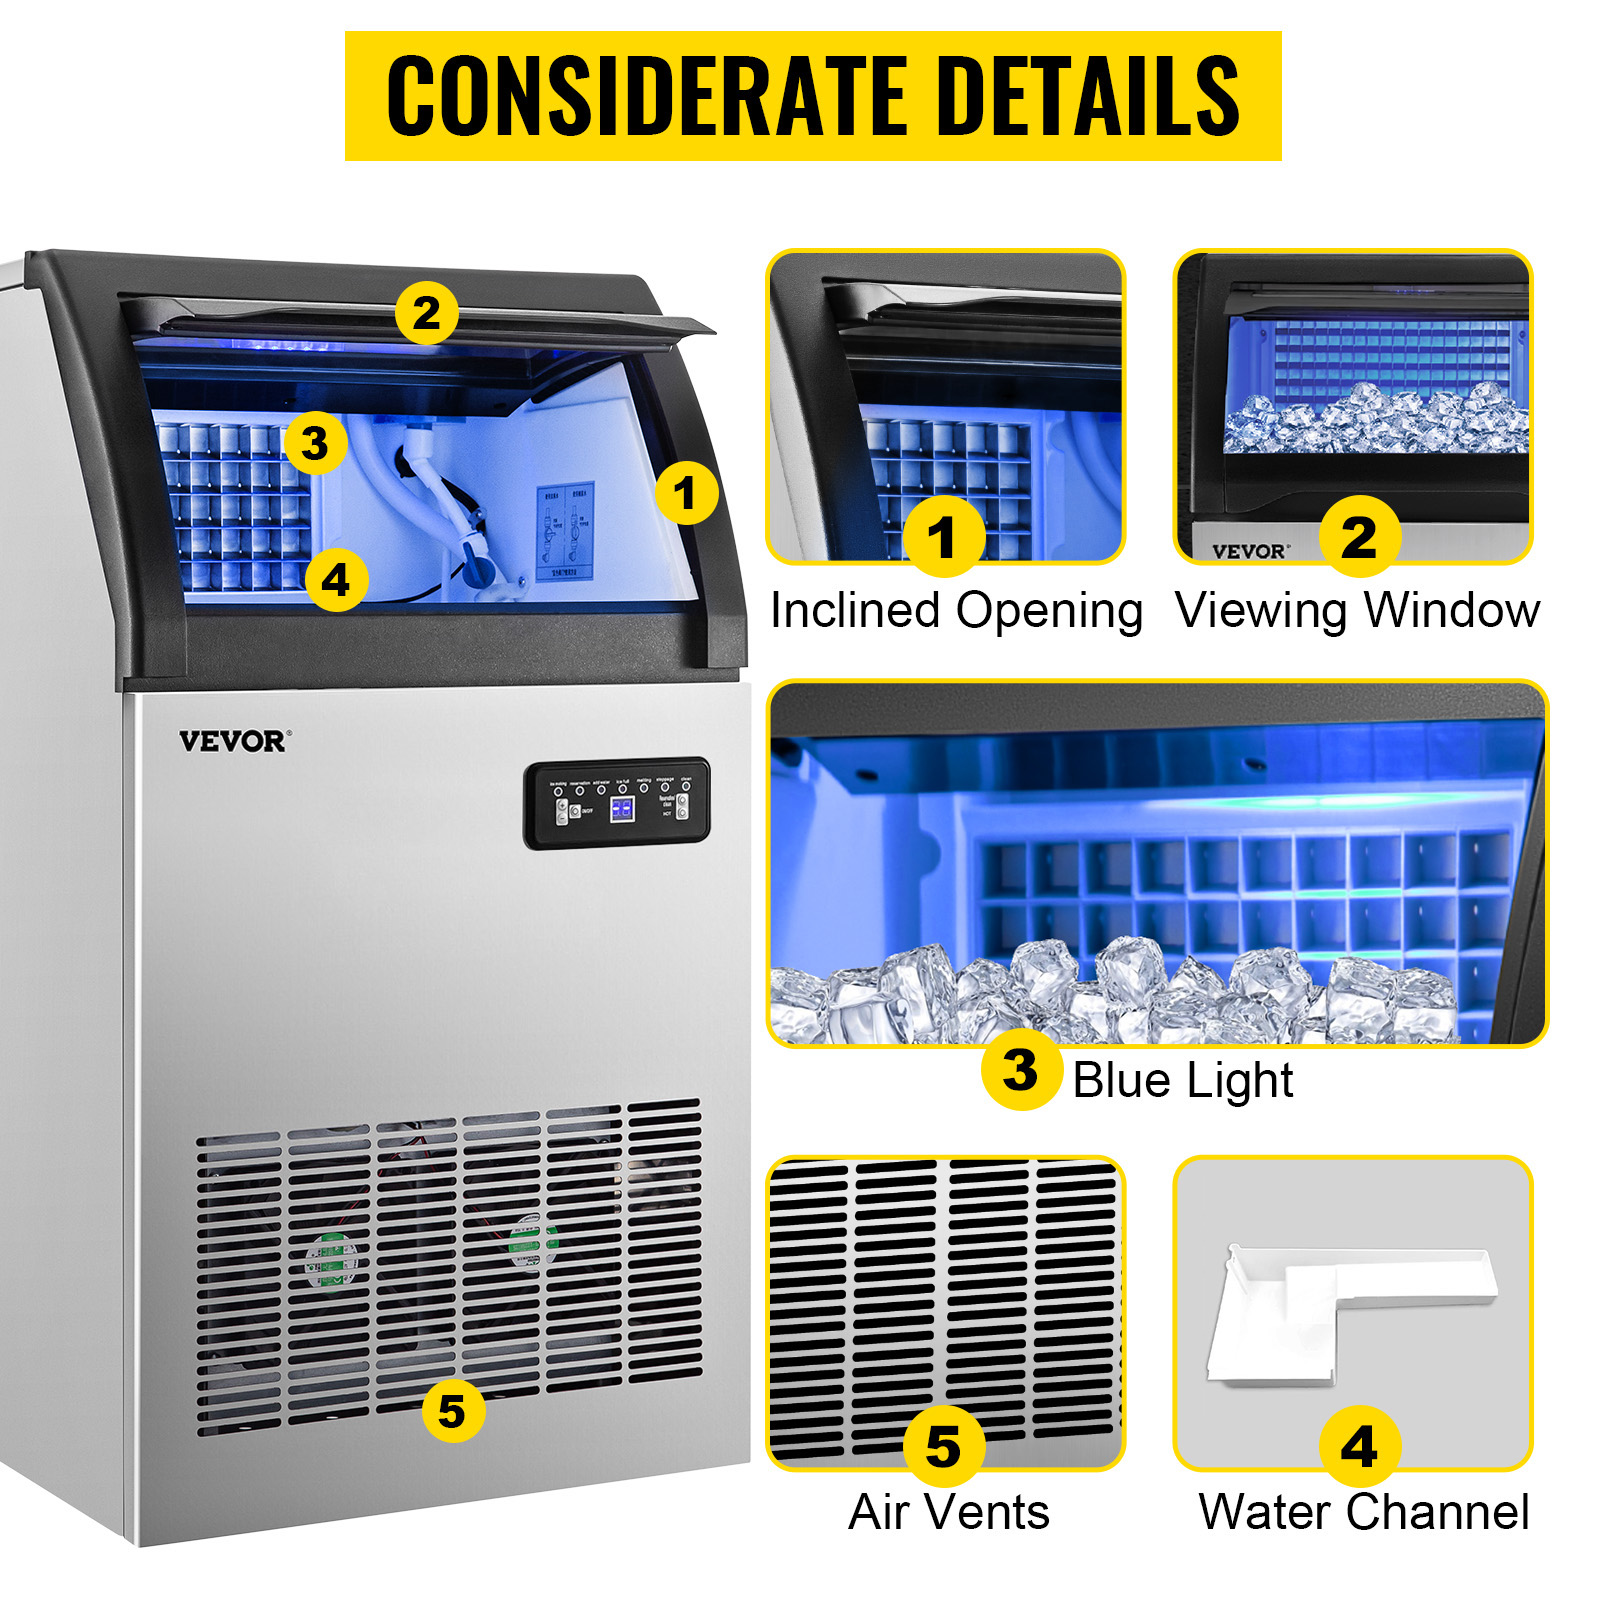 VEVOR 110V Commercial Ice Maker Machine 155LBS/24H, 530W Stainless Steel Ice  Machine with 33LBS Storage Capacity, 72 Ice Cubes Ready in 11-15Mins,  Includes Water Filter and Connection Hose